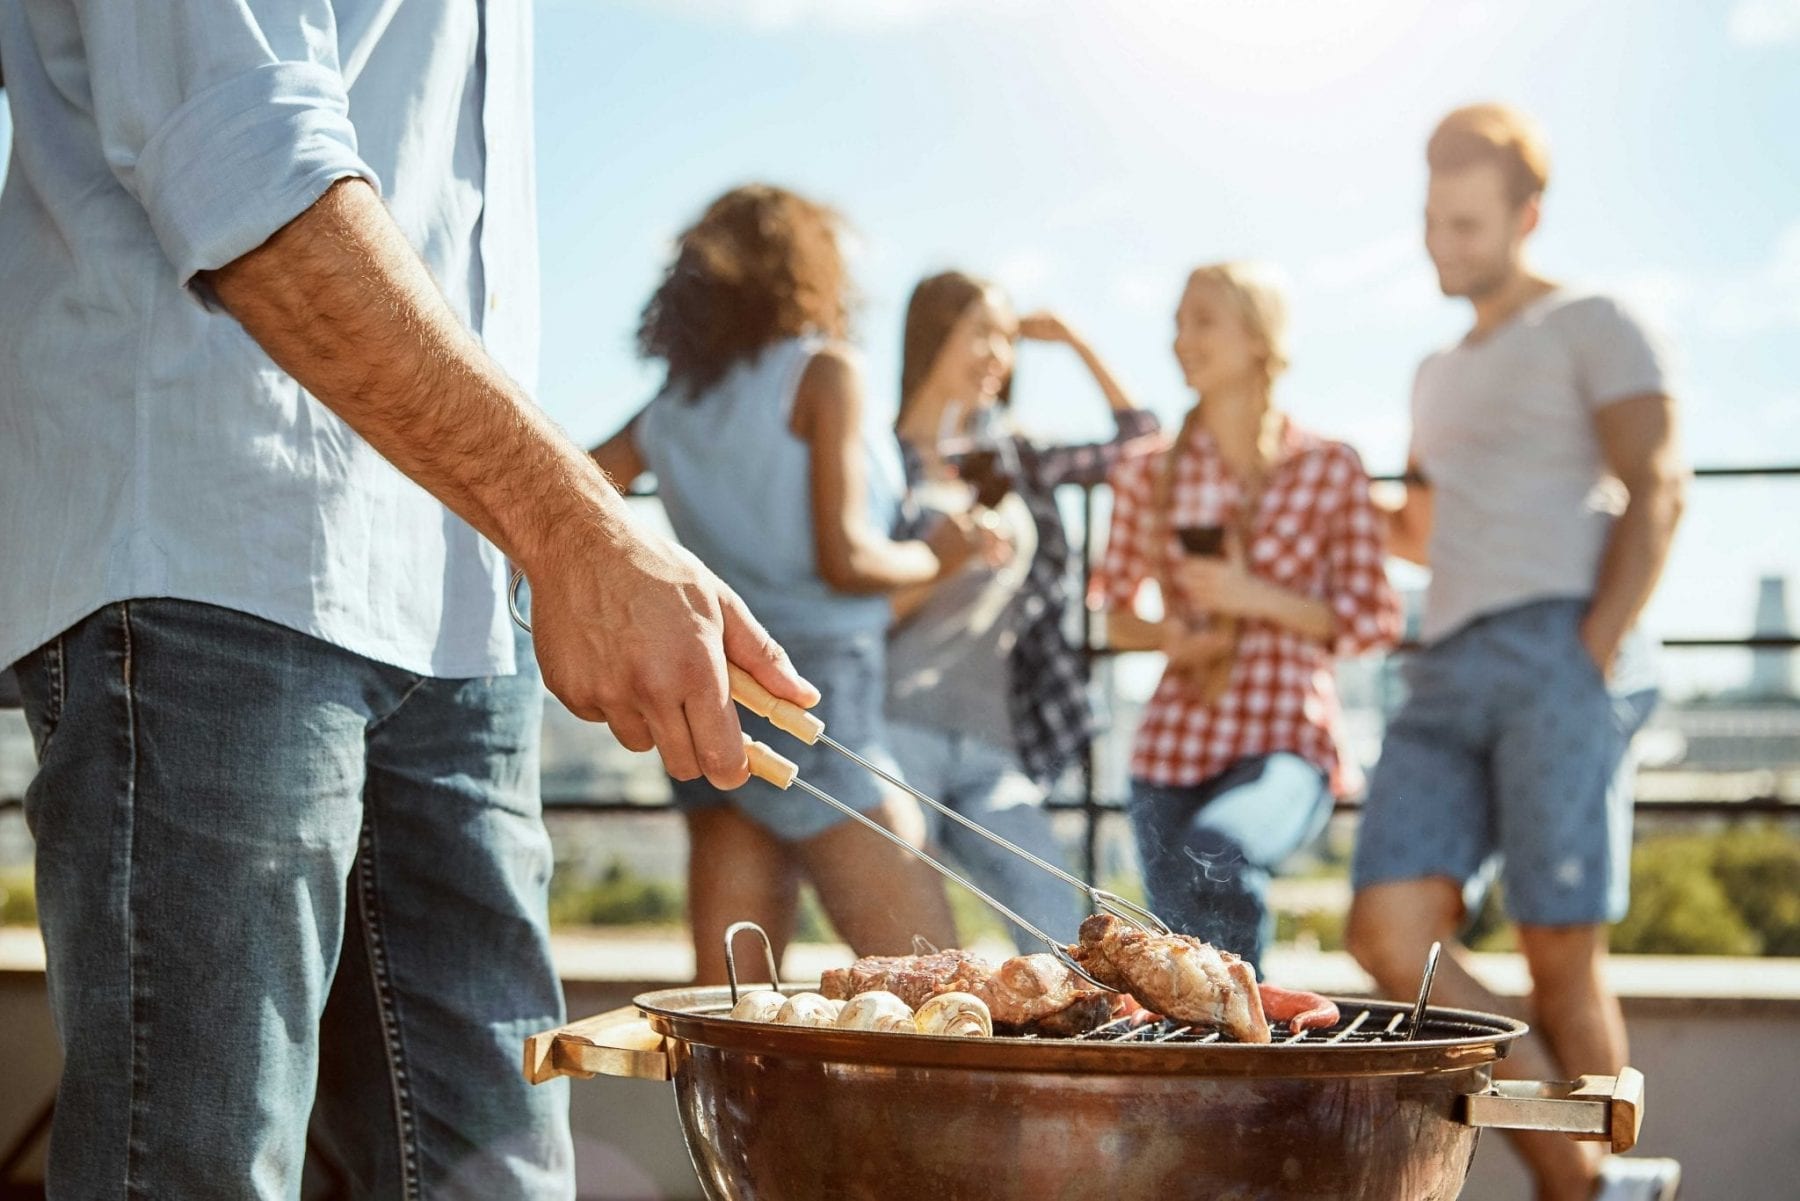 Man grilling outdoors with friends in background